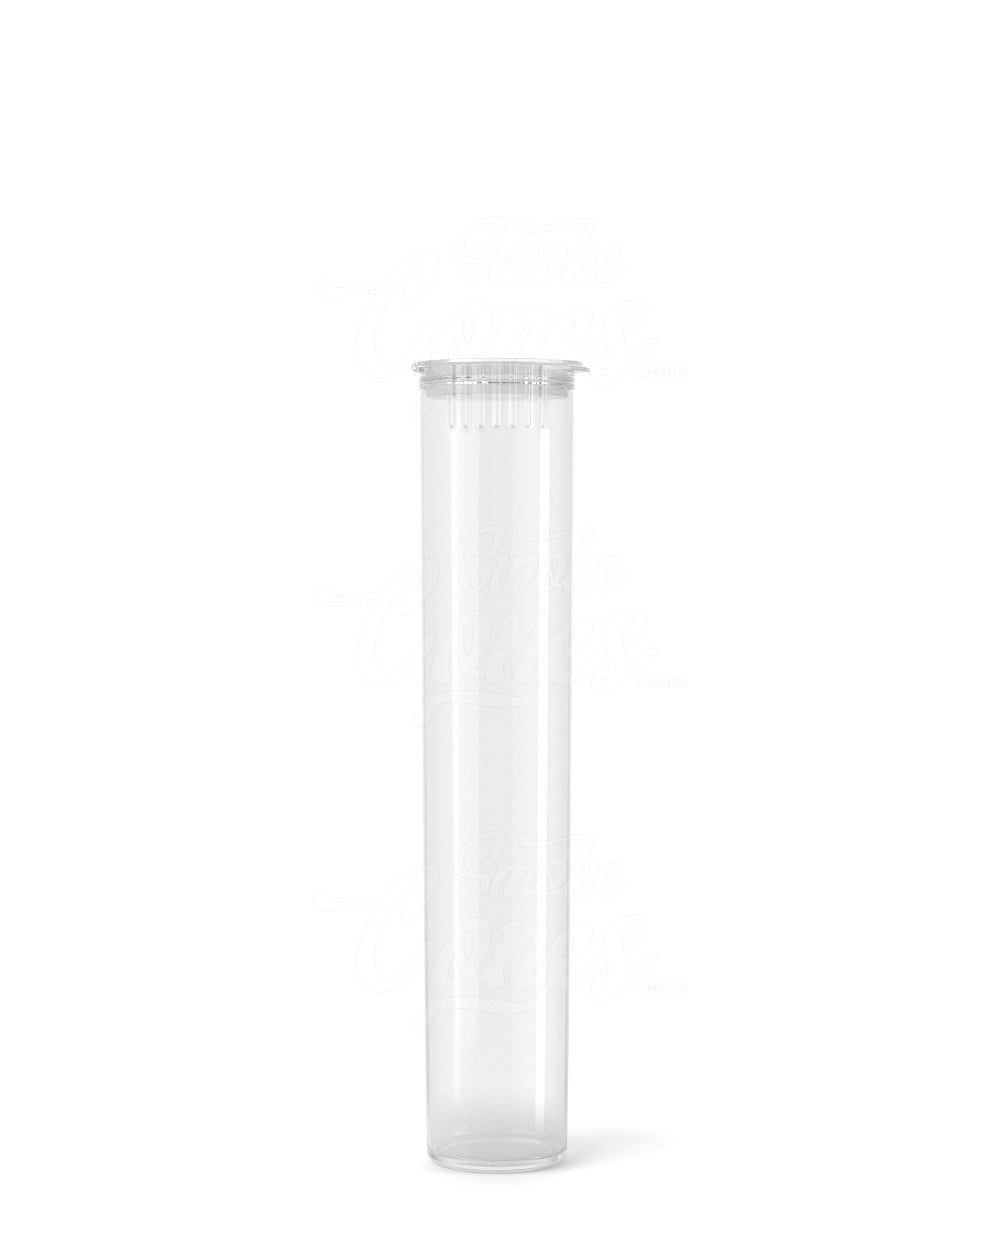 95mm Child Resistant Pop Top Opaque Clear Plastic Pre-Roll Tubes 1000/Box Closed - 3